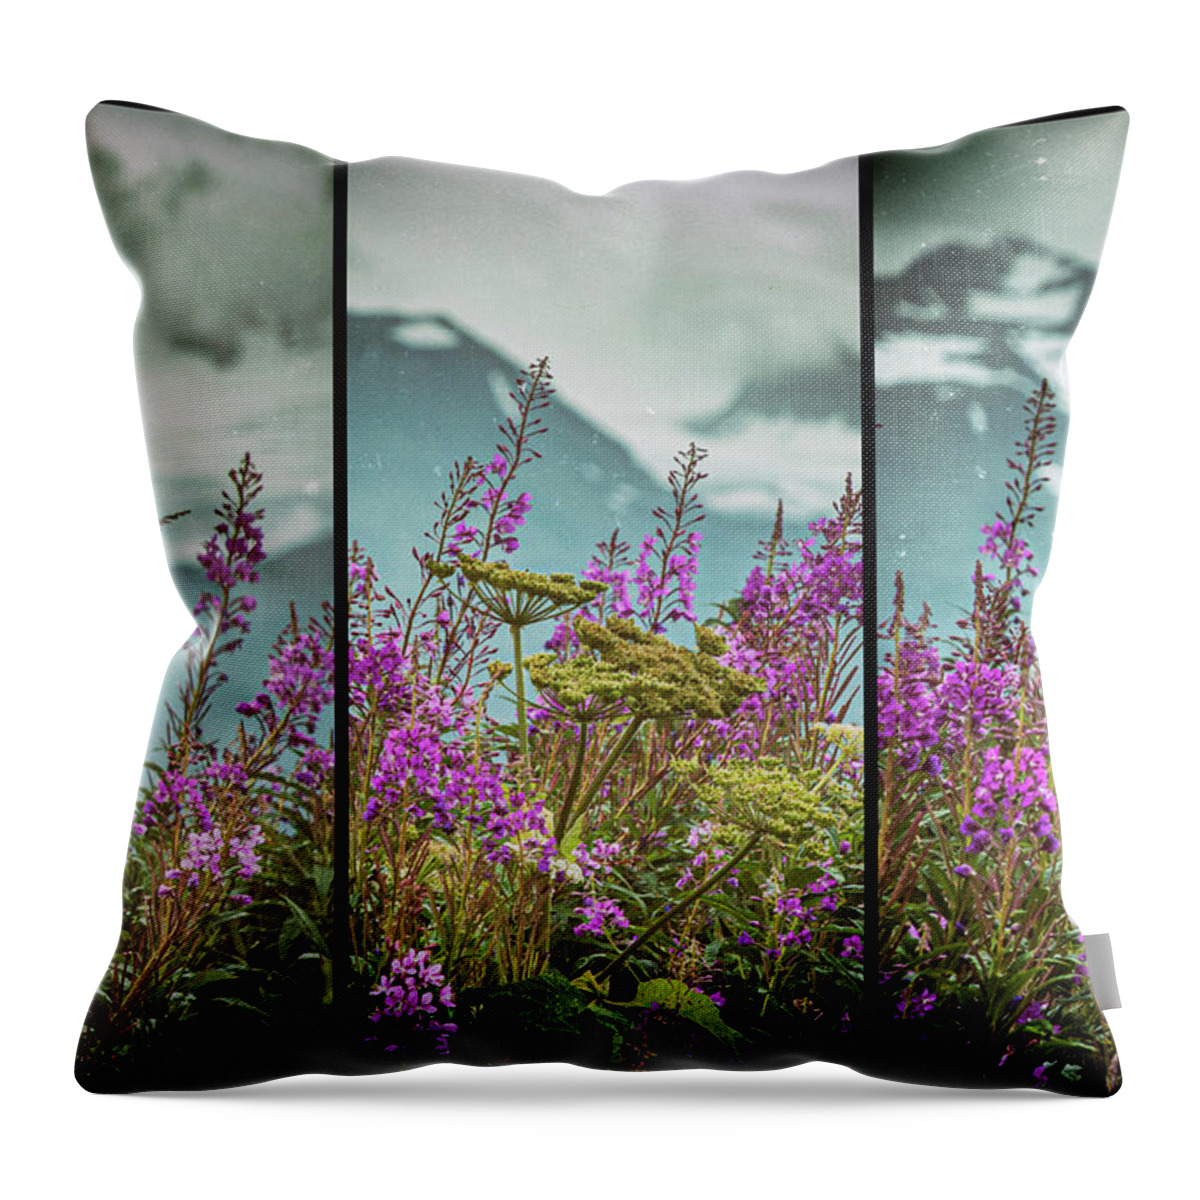 Fireweed Throw Pillow featuring the photograph Fireweeds by Jim Cook